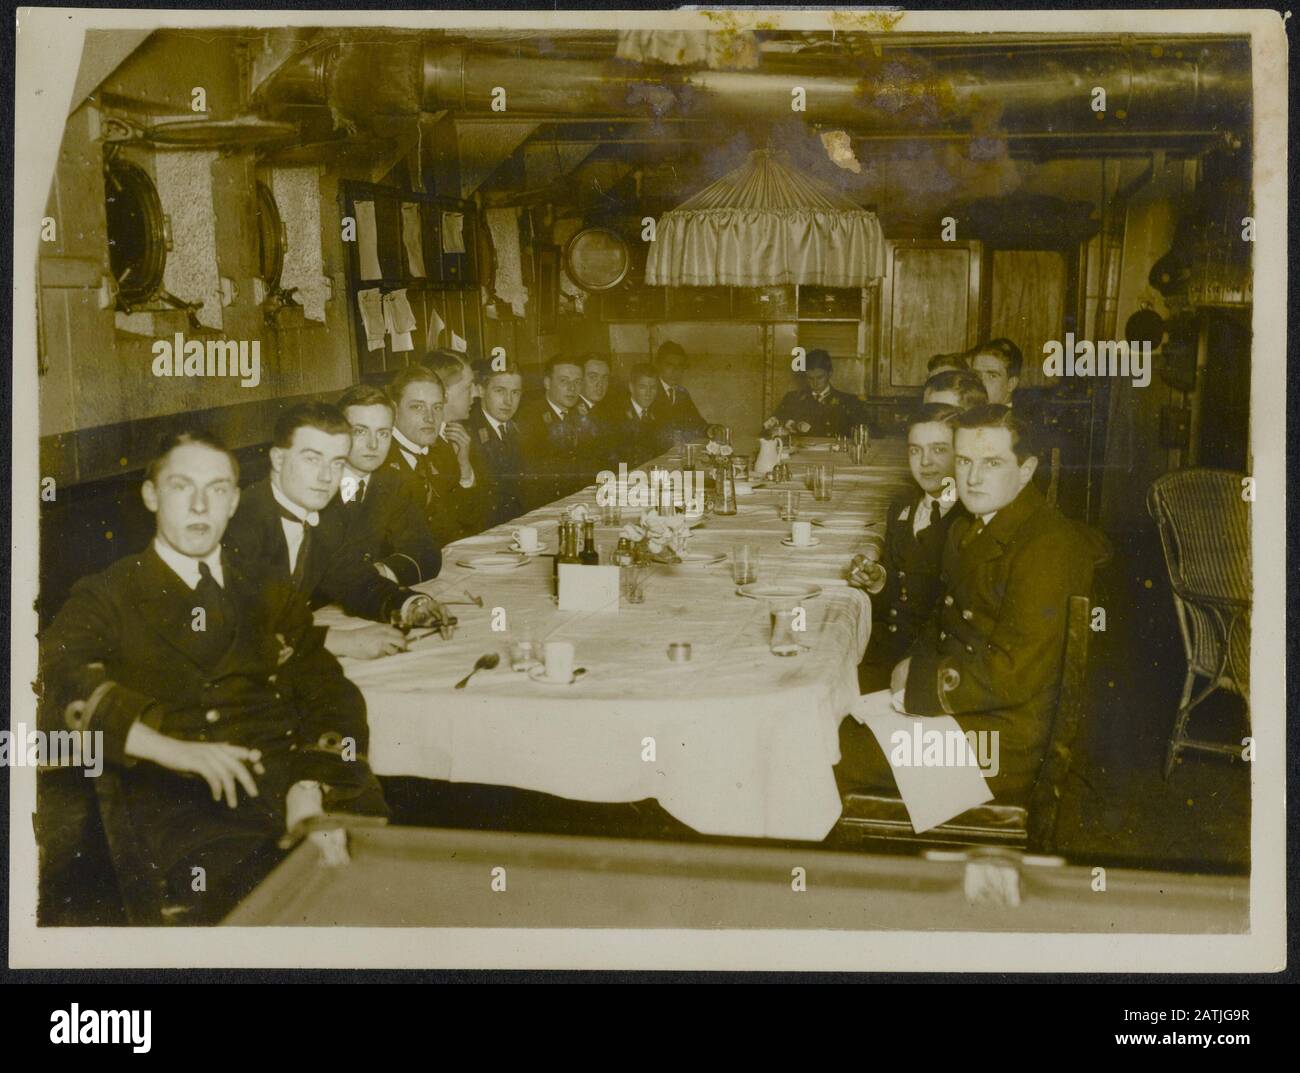 British navy in wartime Description: In the gun room in a battleship, after dinner. Annotation: The British Navy in wartime. Naval officers on a warship after dinner. Date: {1914-1918} Keywords: WWI, meals, naval officers, battleships Stock Photo